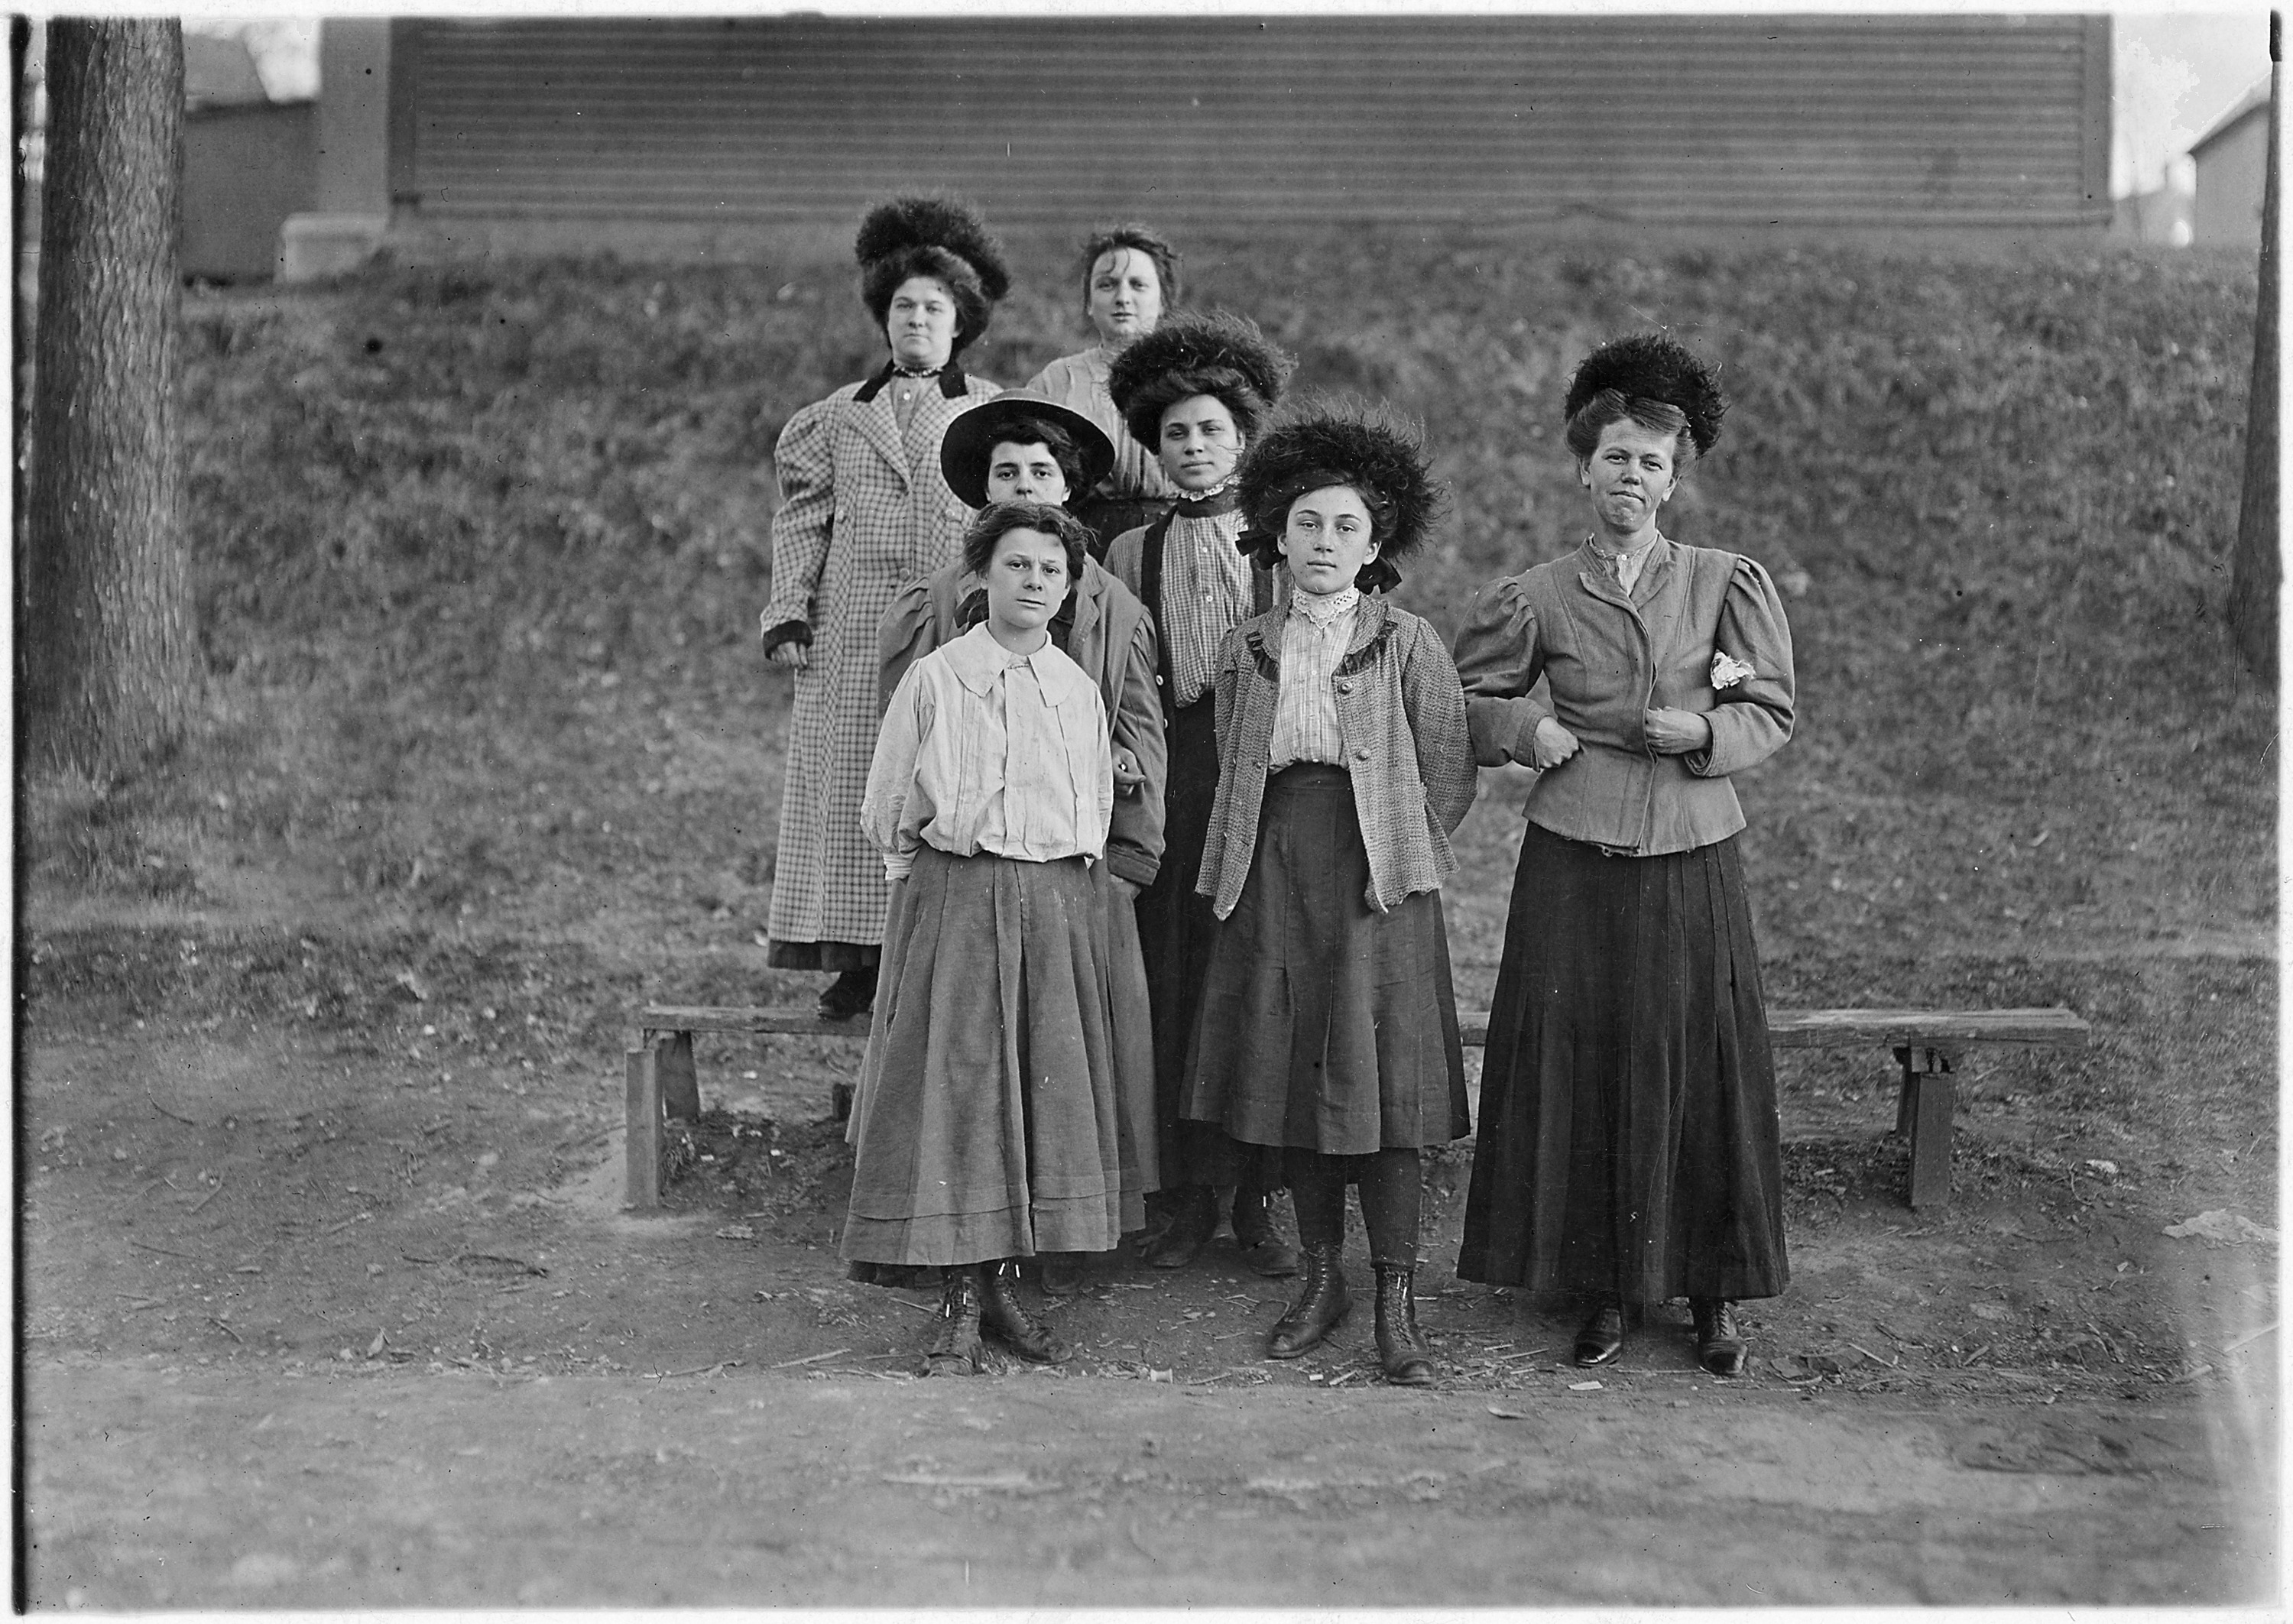 6 P.M. Only a few young girls work in the Chace Cotton Mill. In front row are Anna Grenier, 2 years in the mill... - NARA - 523187